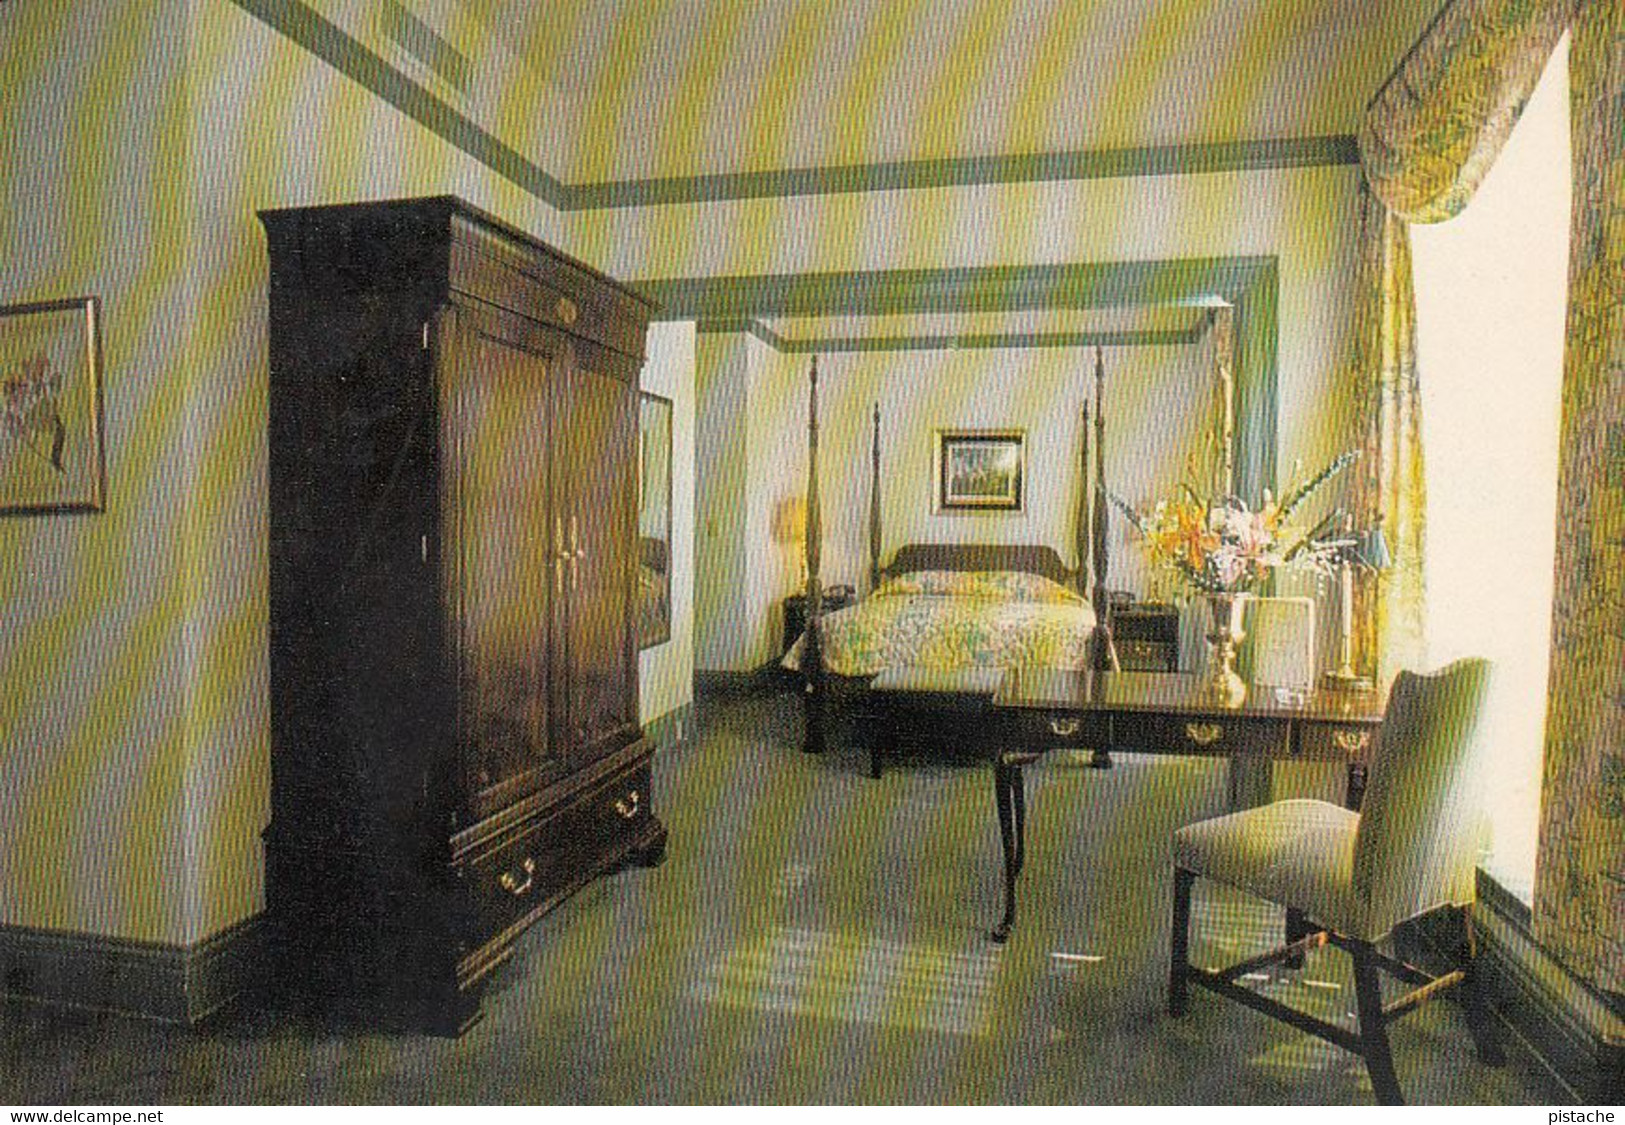 Louisville Kentucky KY - Grand Hotel - The Seelbach - Typical Guest Room - Size 4 X 6 - Unused - 2 Scans - Louisville